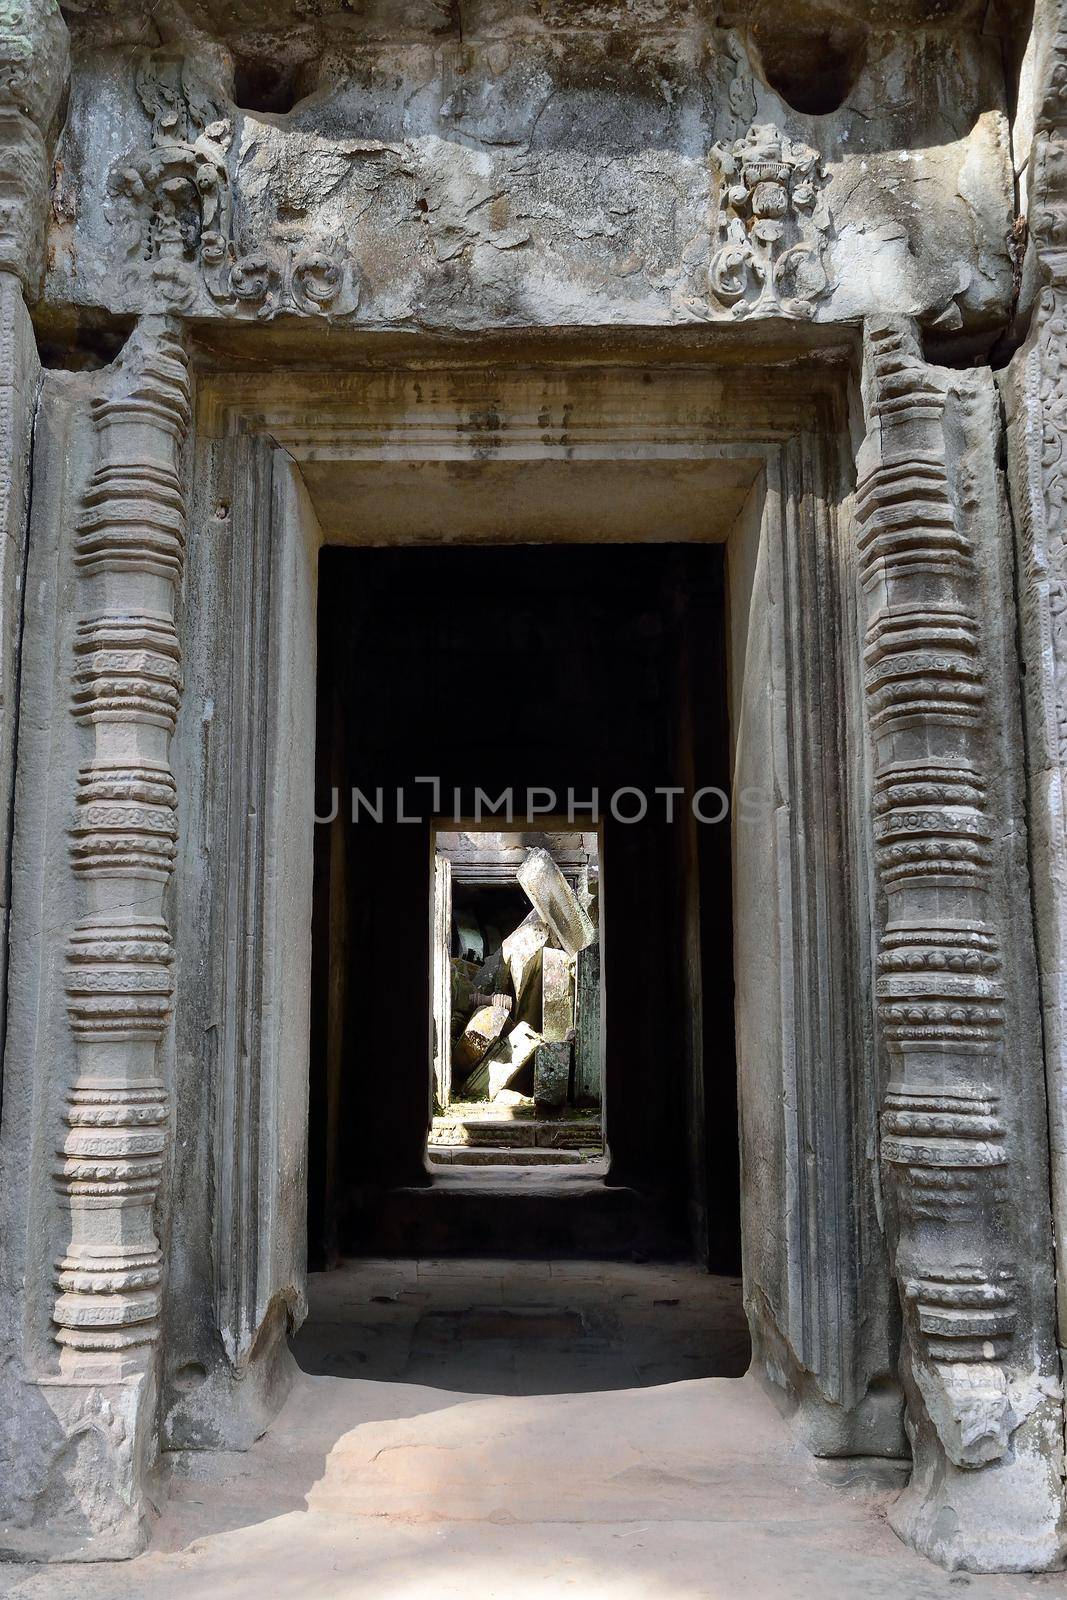 Temple in the Angkor complex, Siem Reap, Cambodia. by silentstock639